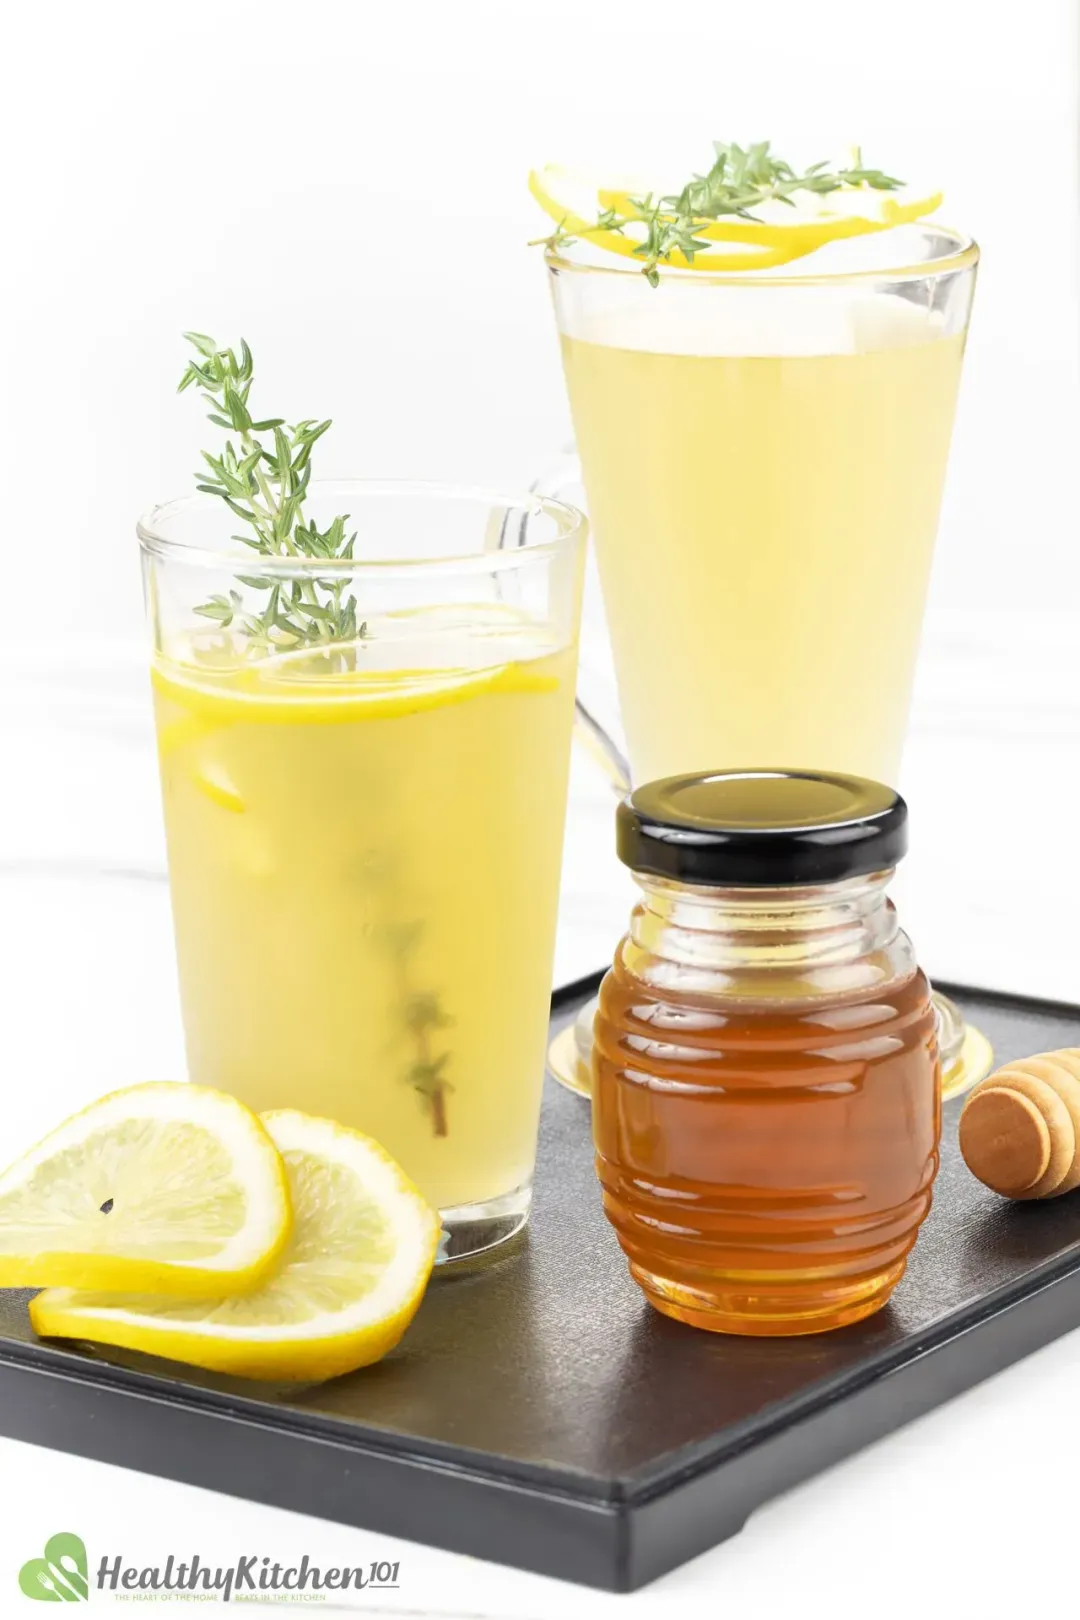 Two lemonade glasses with thyme sprigs put next to a honey jar and two lemon wheels